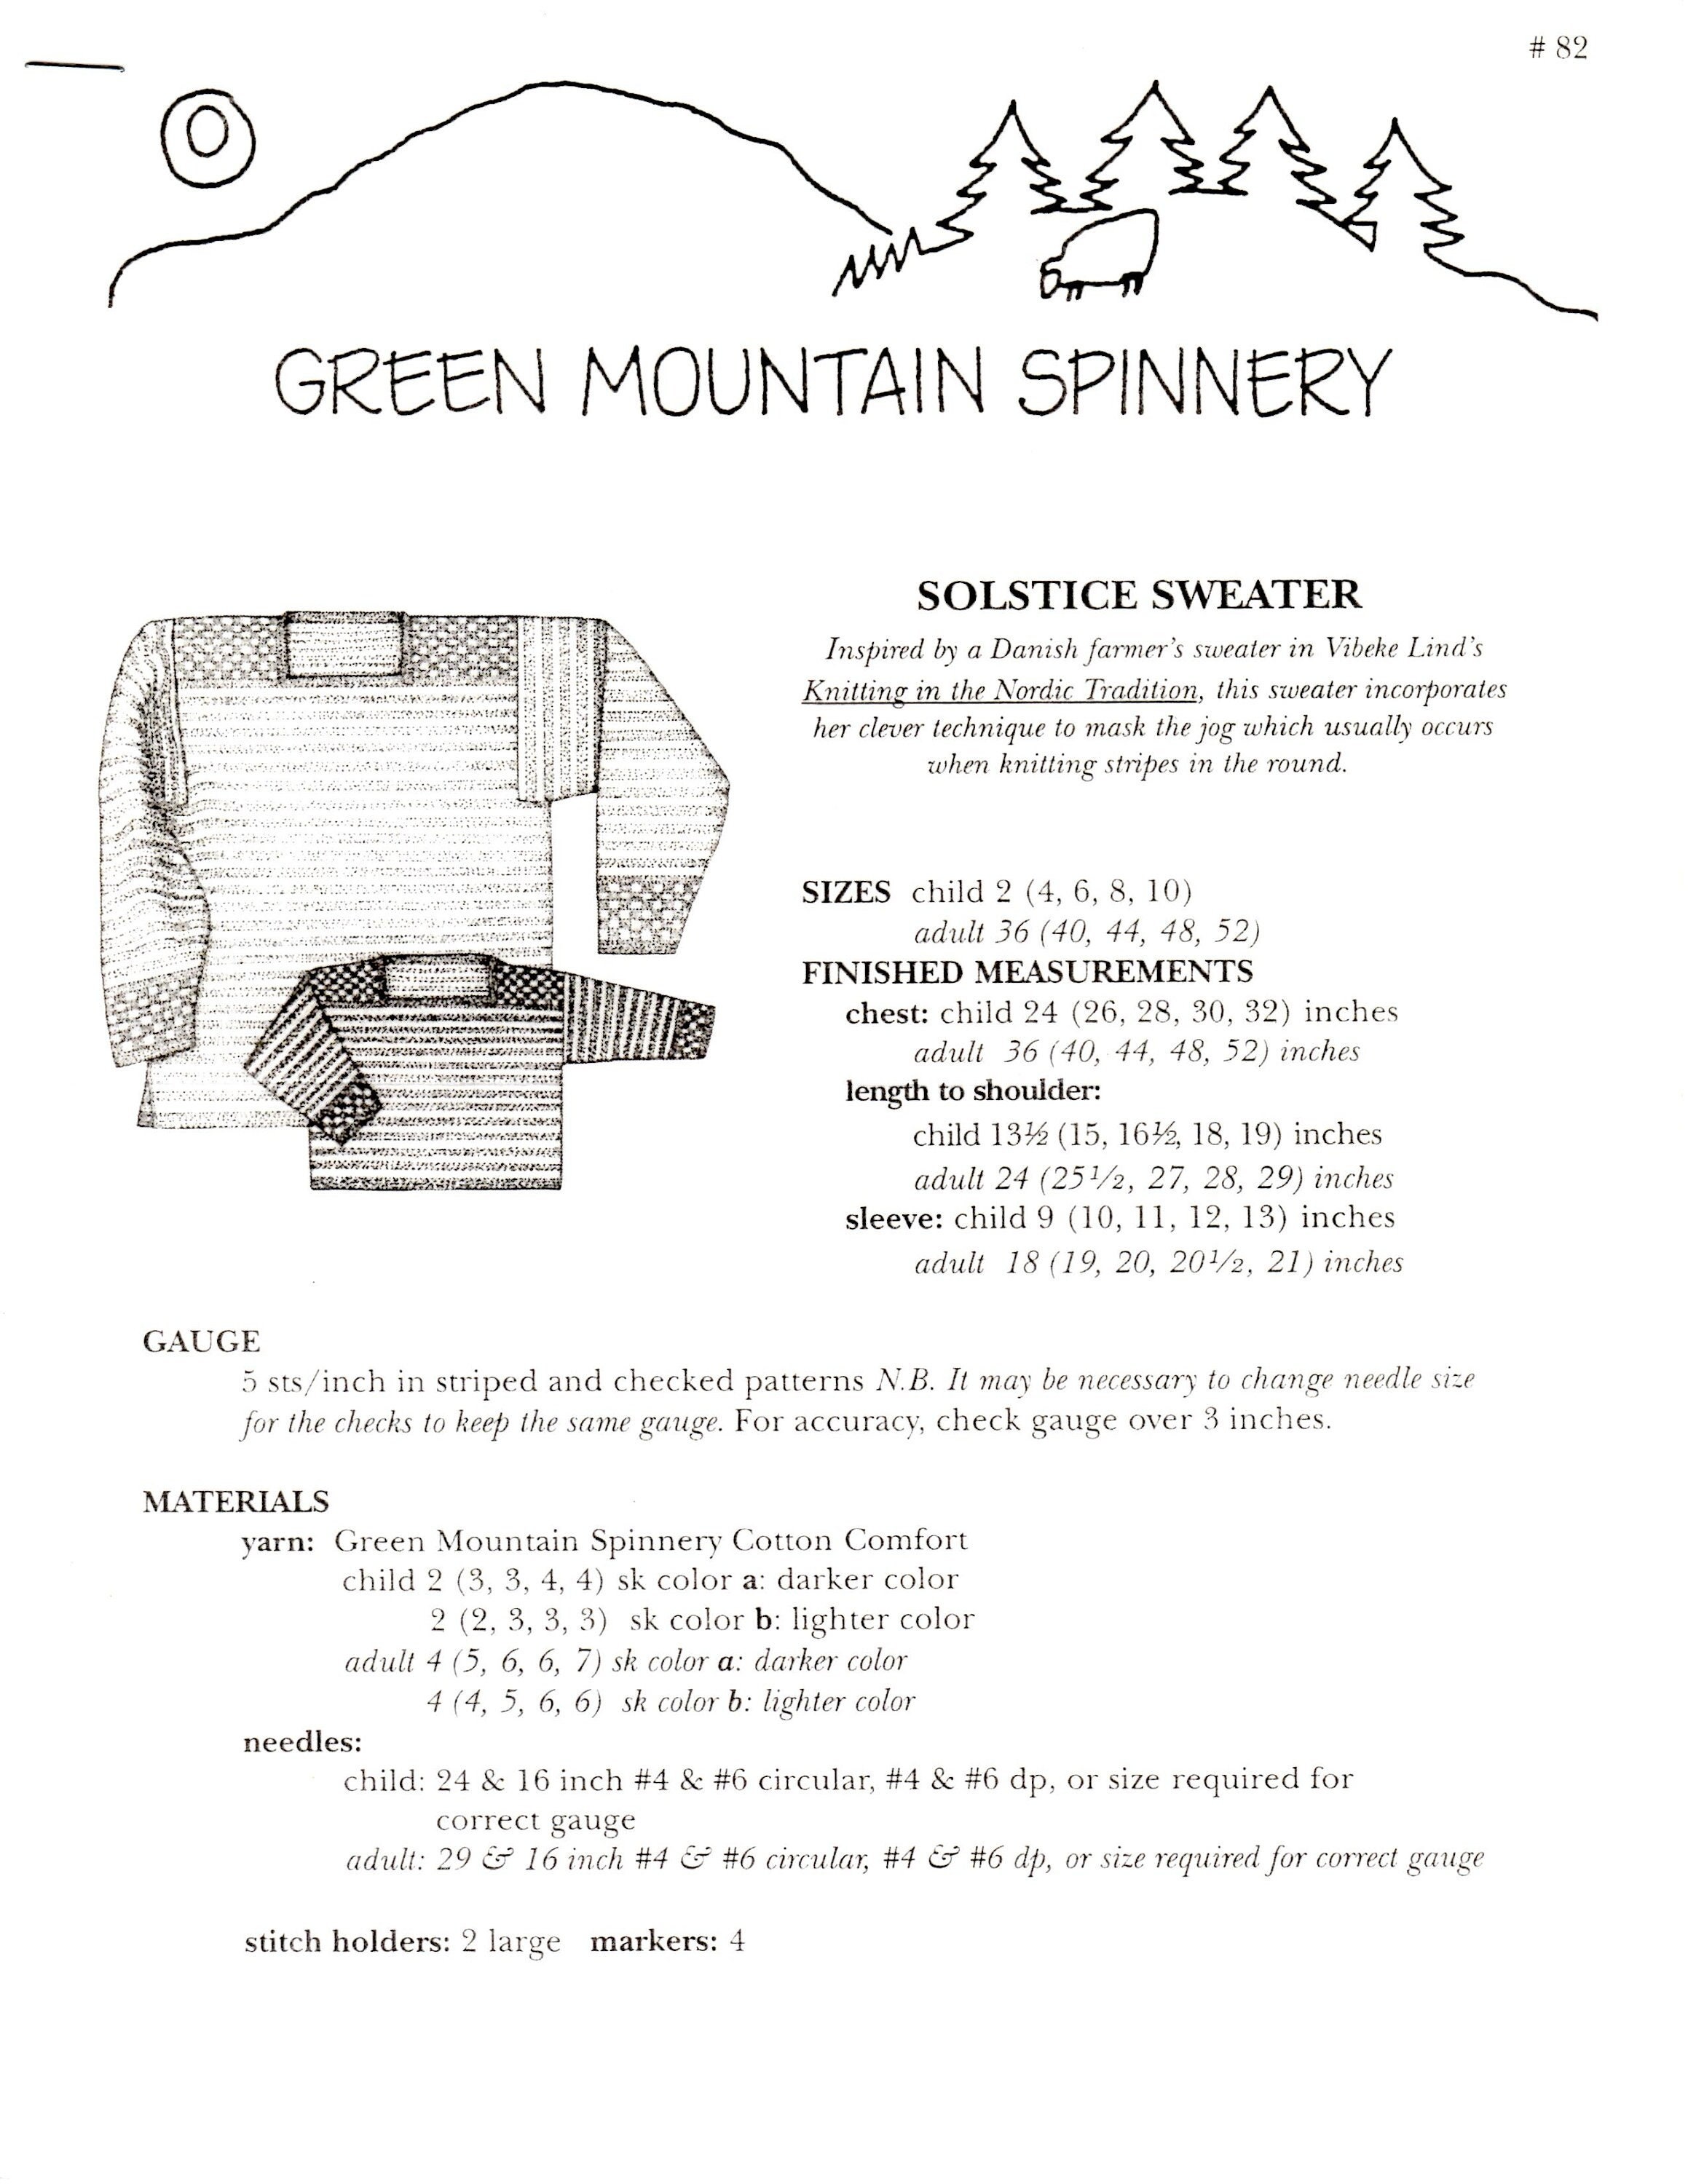 Welcome - Green Mountain Spinnery